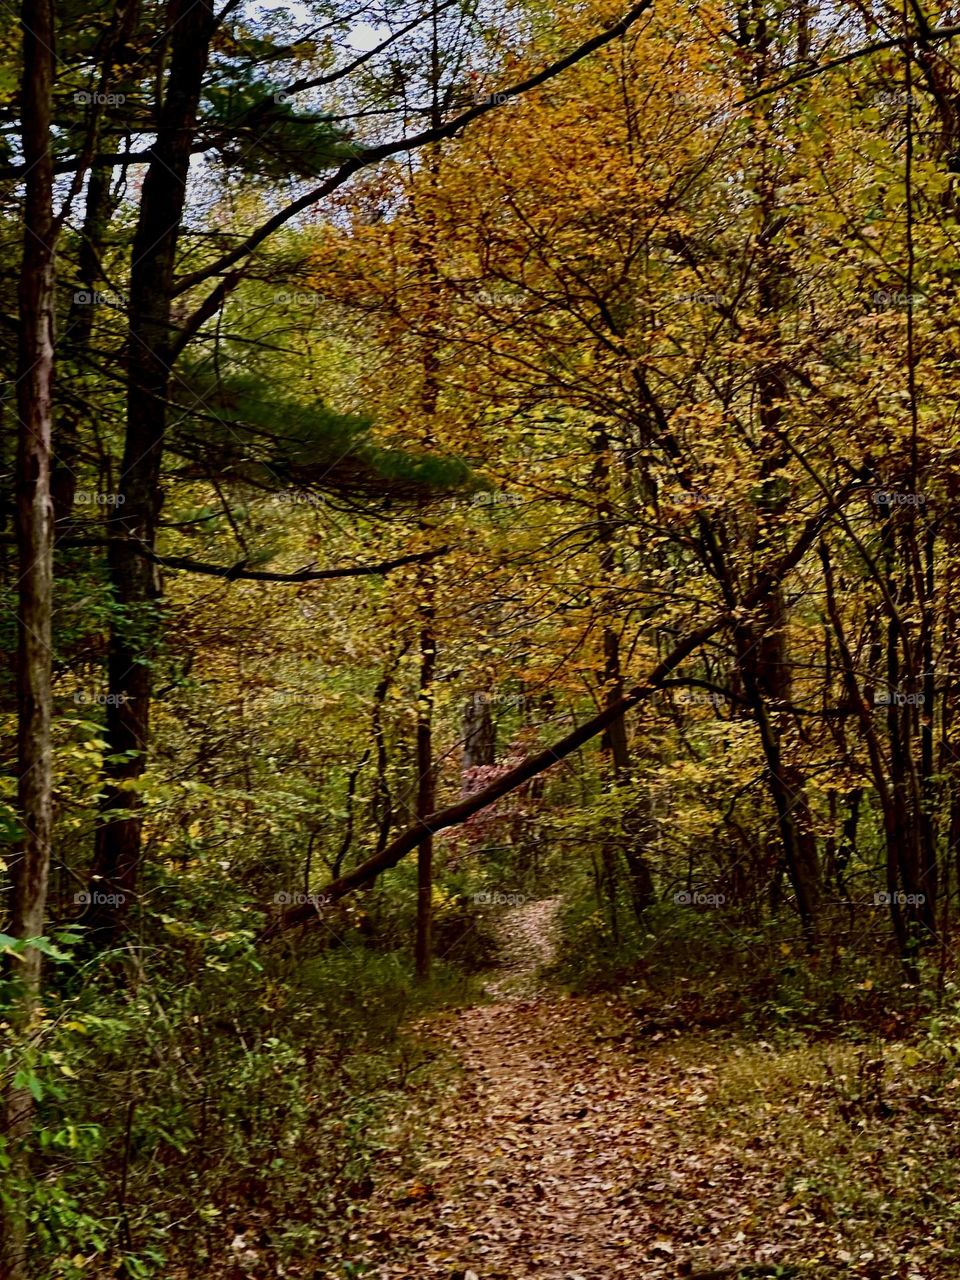 Through the woods. An adventure with fall leaves and all of the colors of autumn on full display